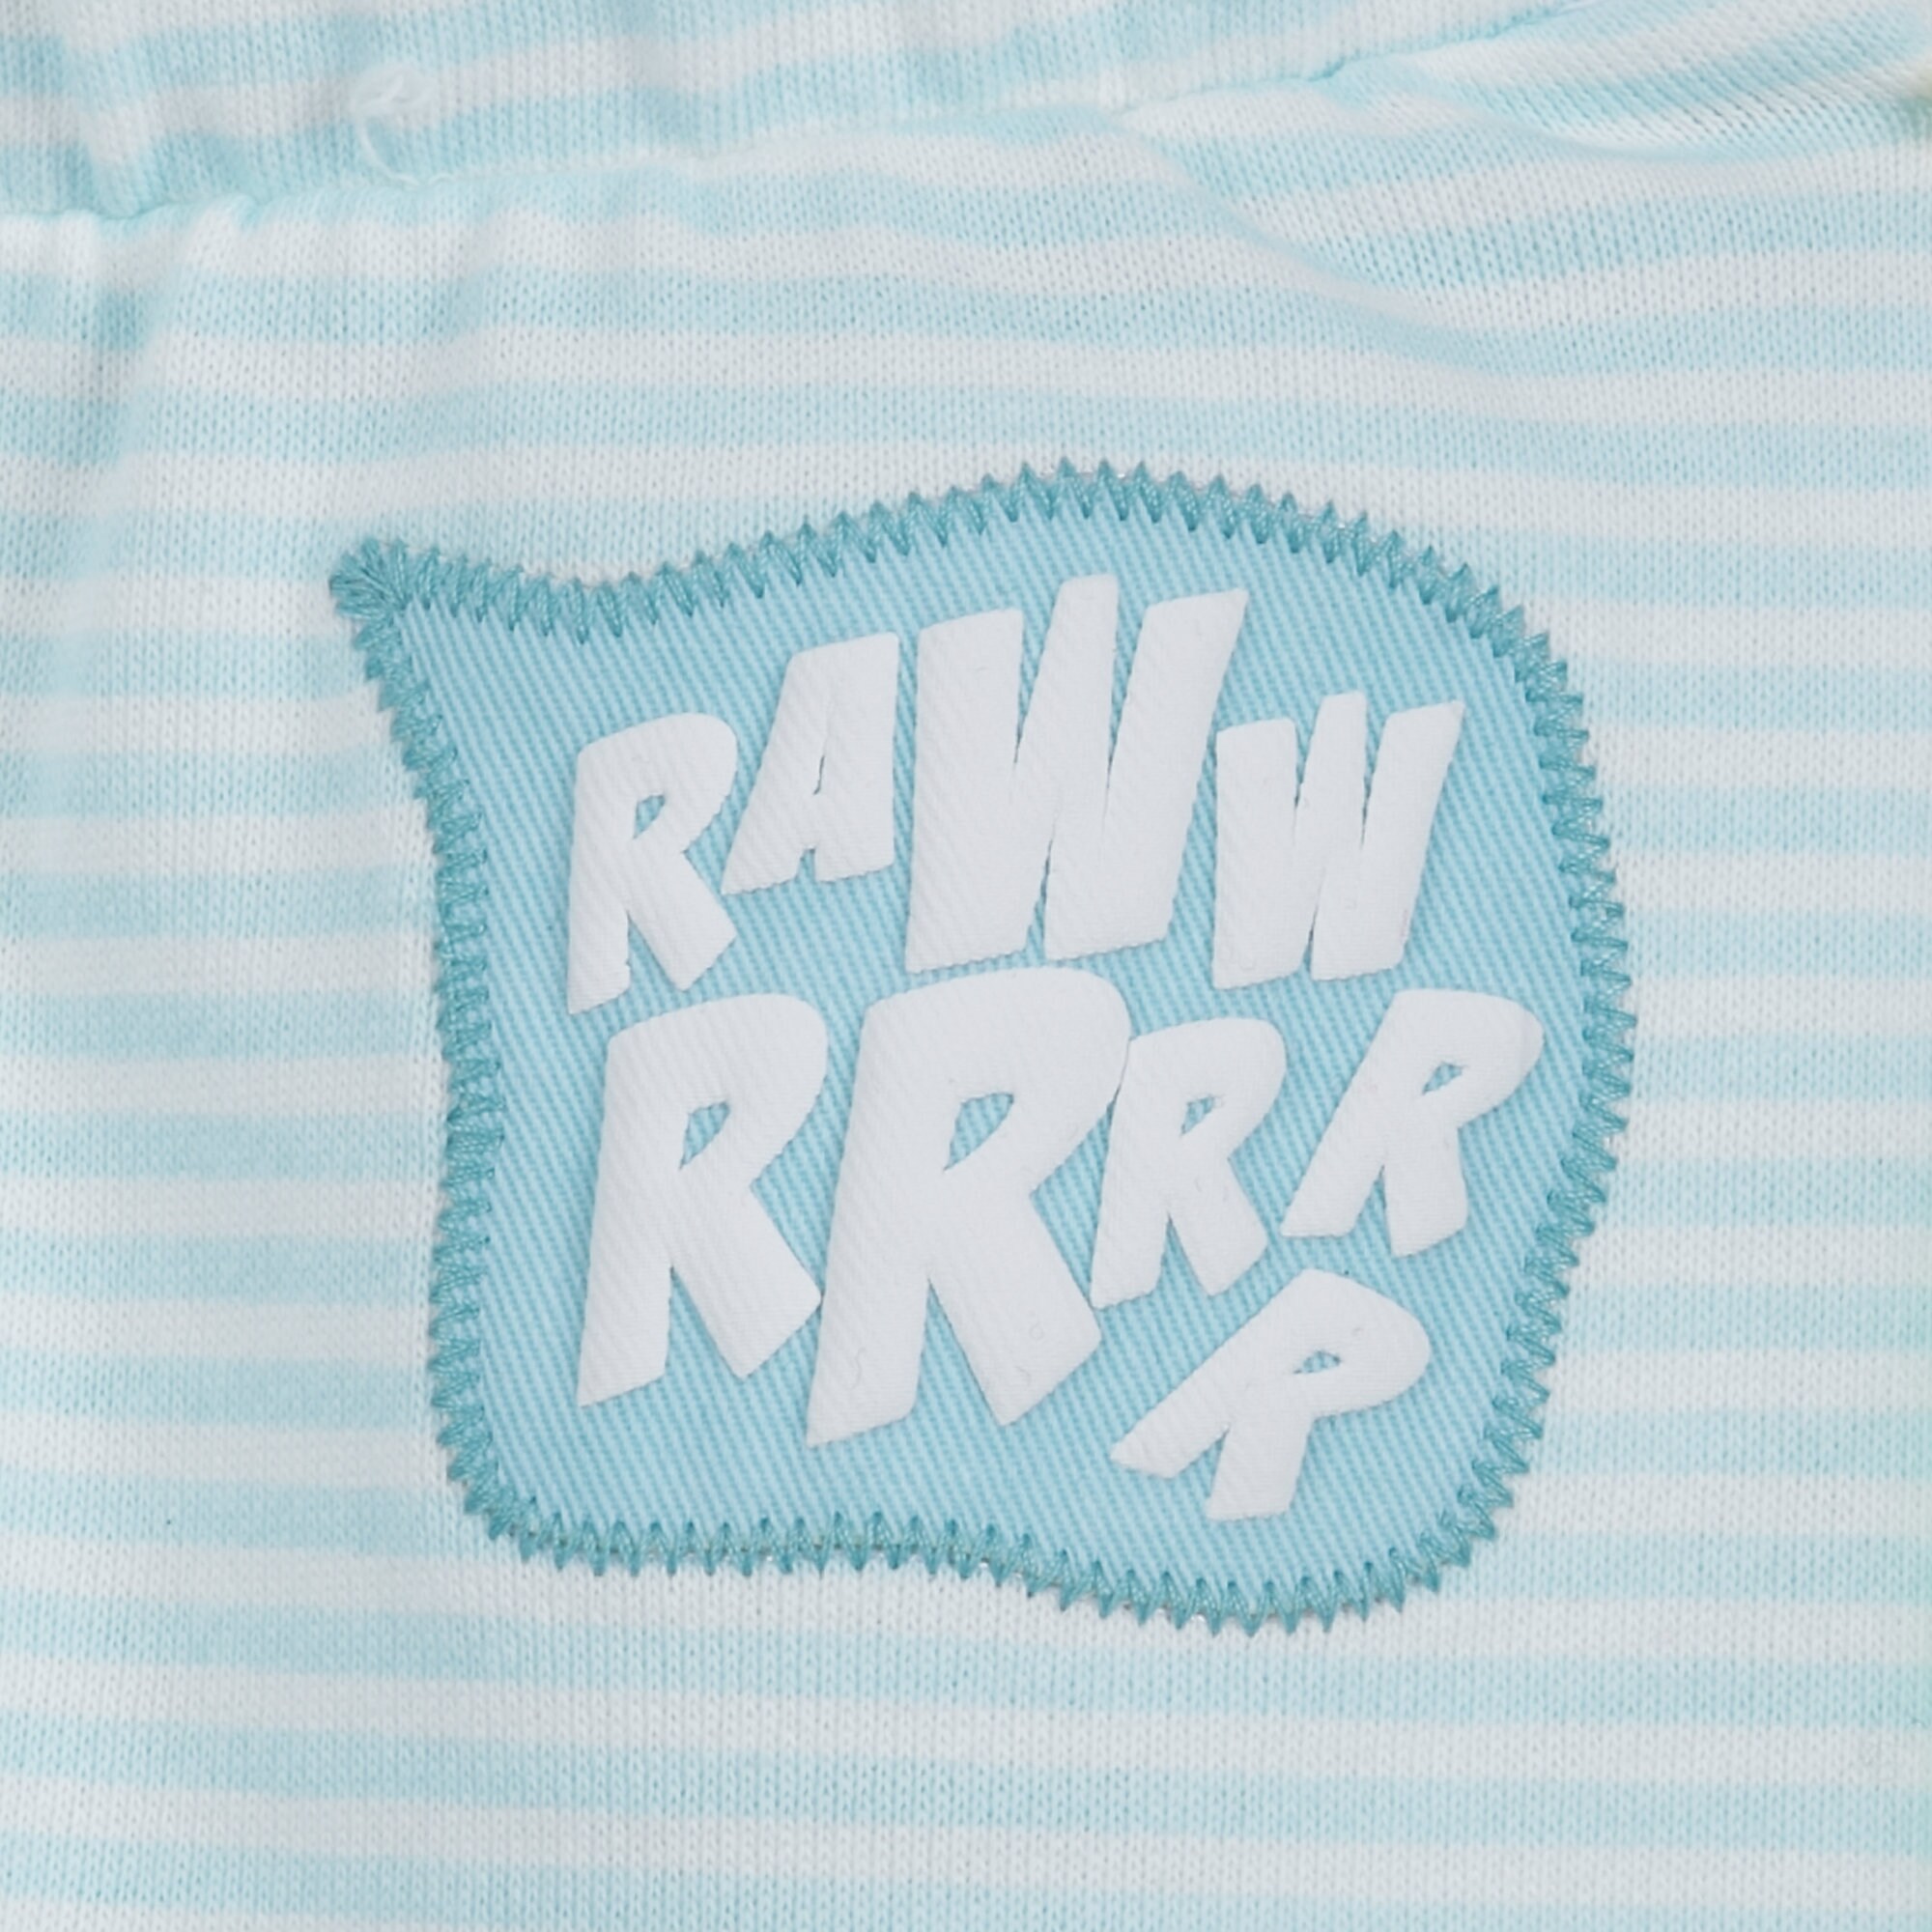 Rex Knit Shirt and Pants Set for Baby - Toy Story